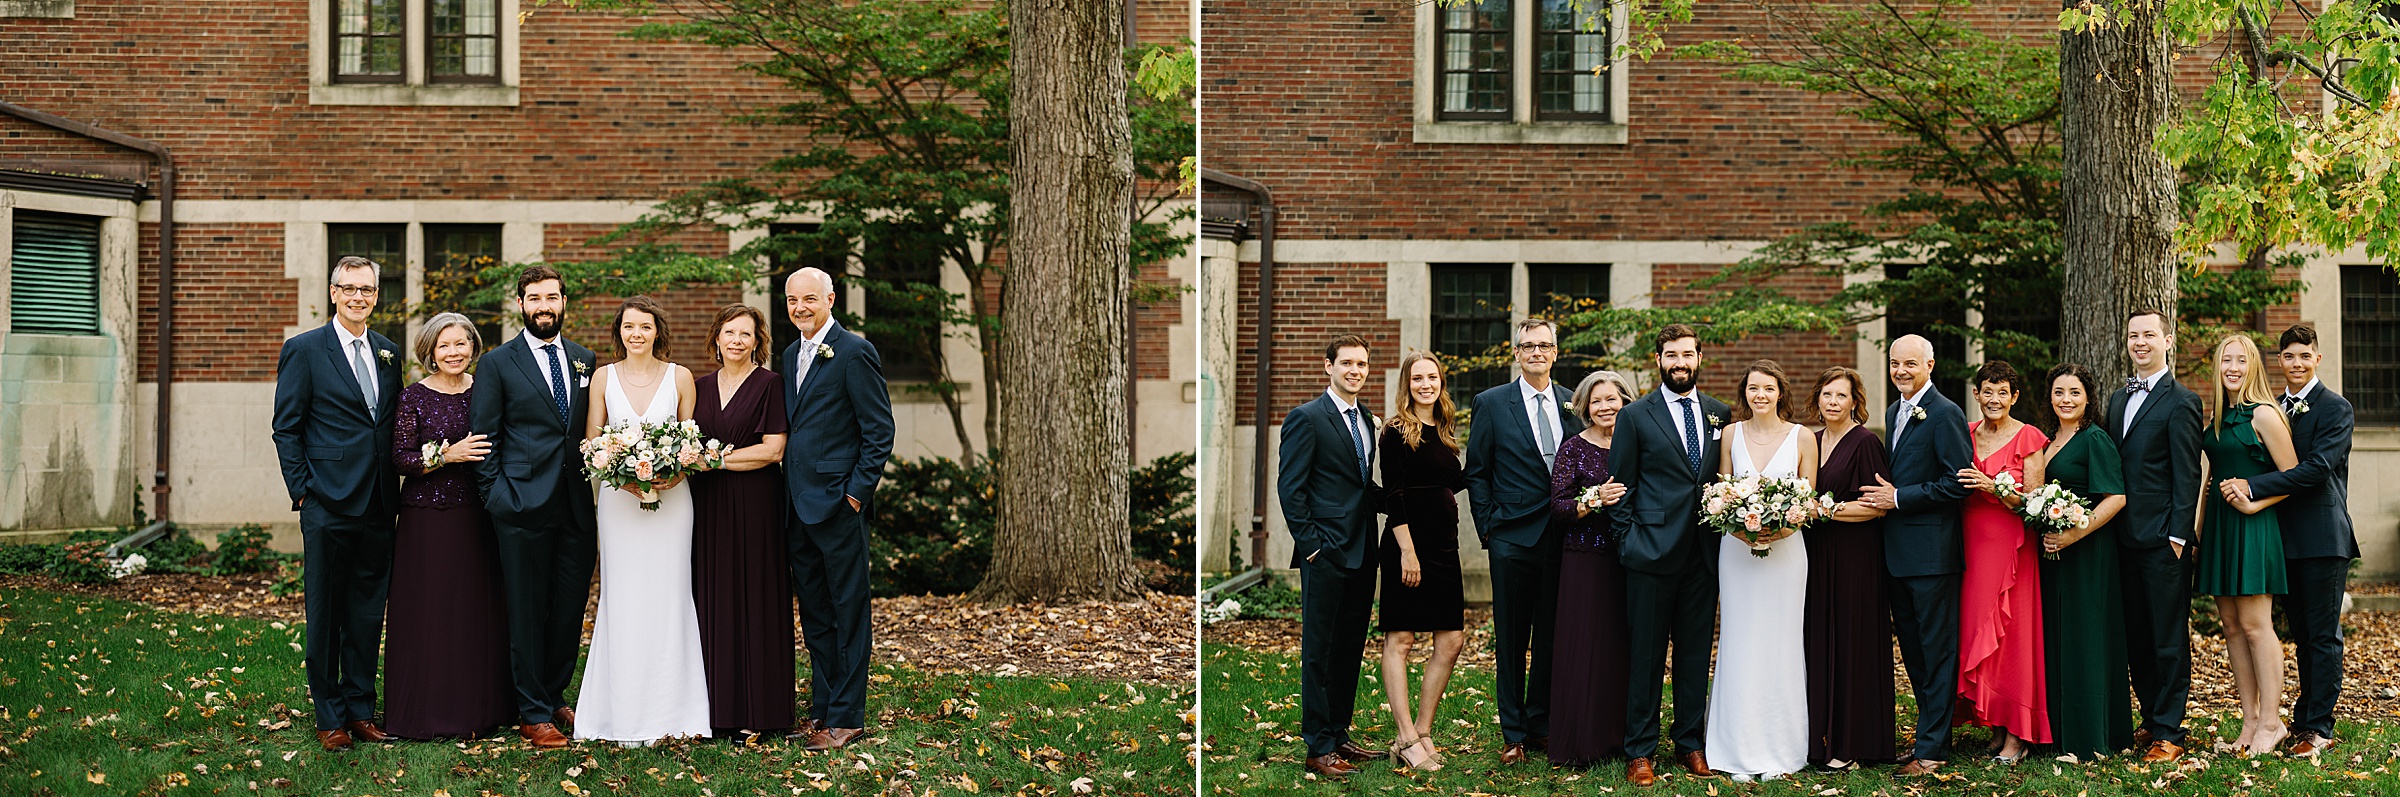 Formals of the bride and groom's family by Detroit Wedding Photographer Michele Maloney